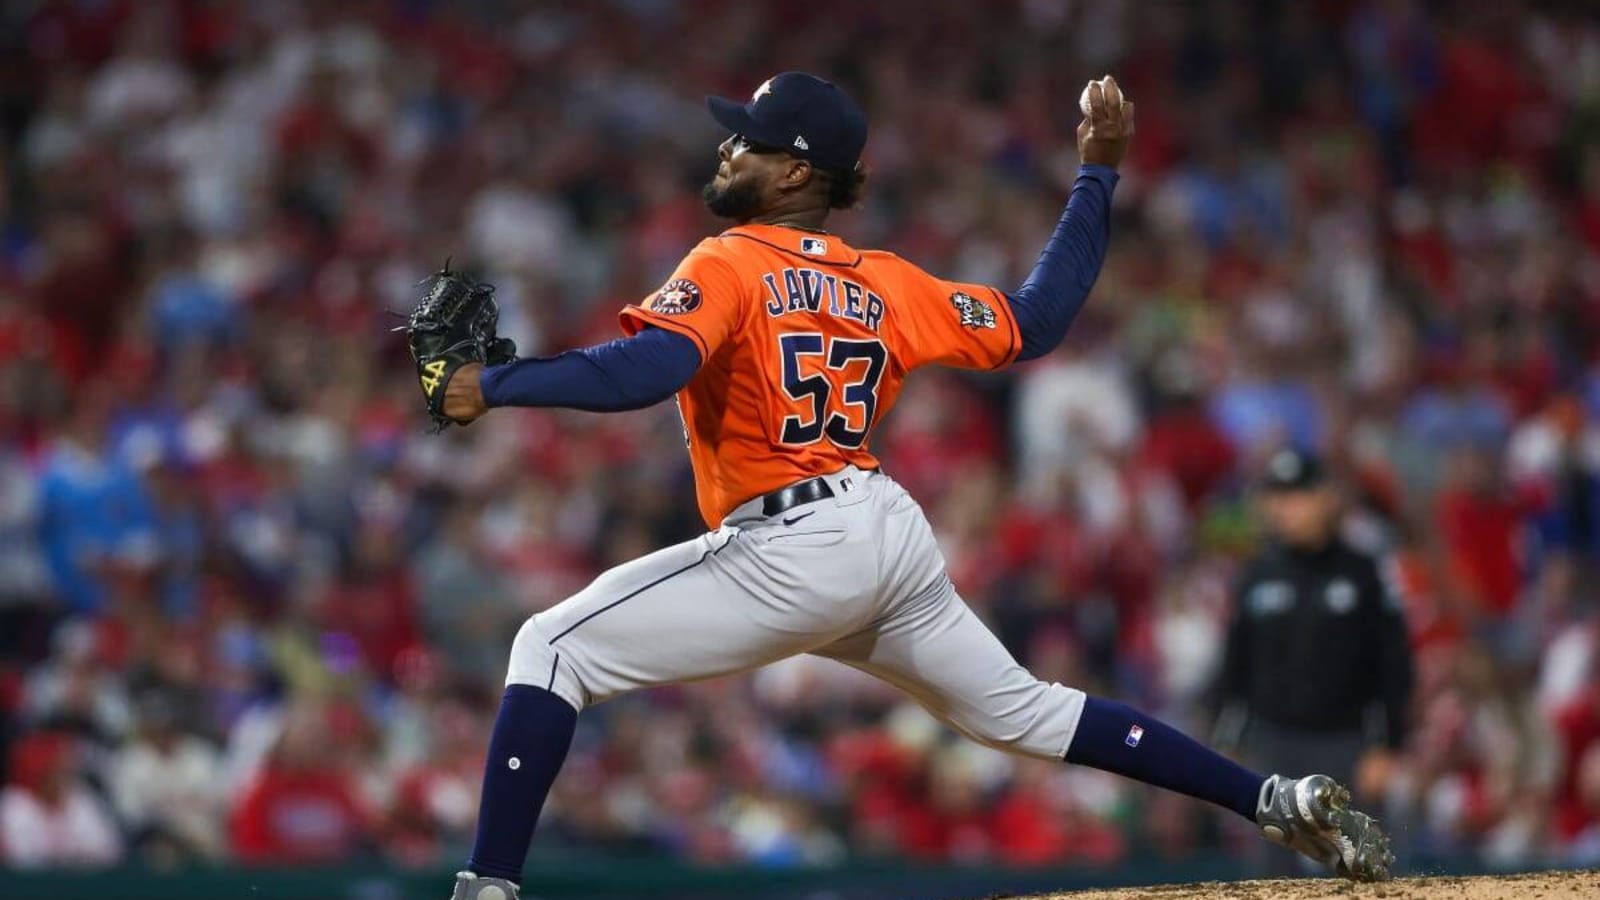 Cristian Javier, Astros Agree to Extension